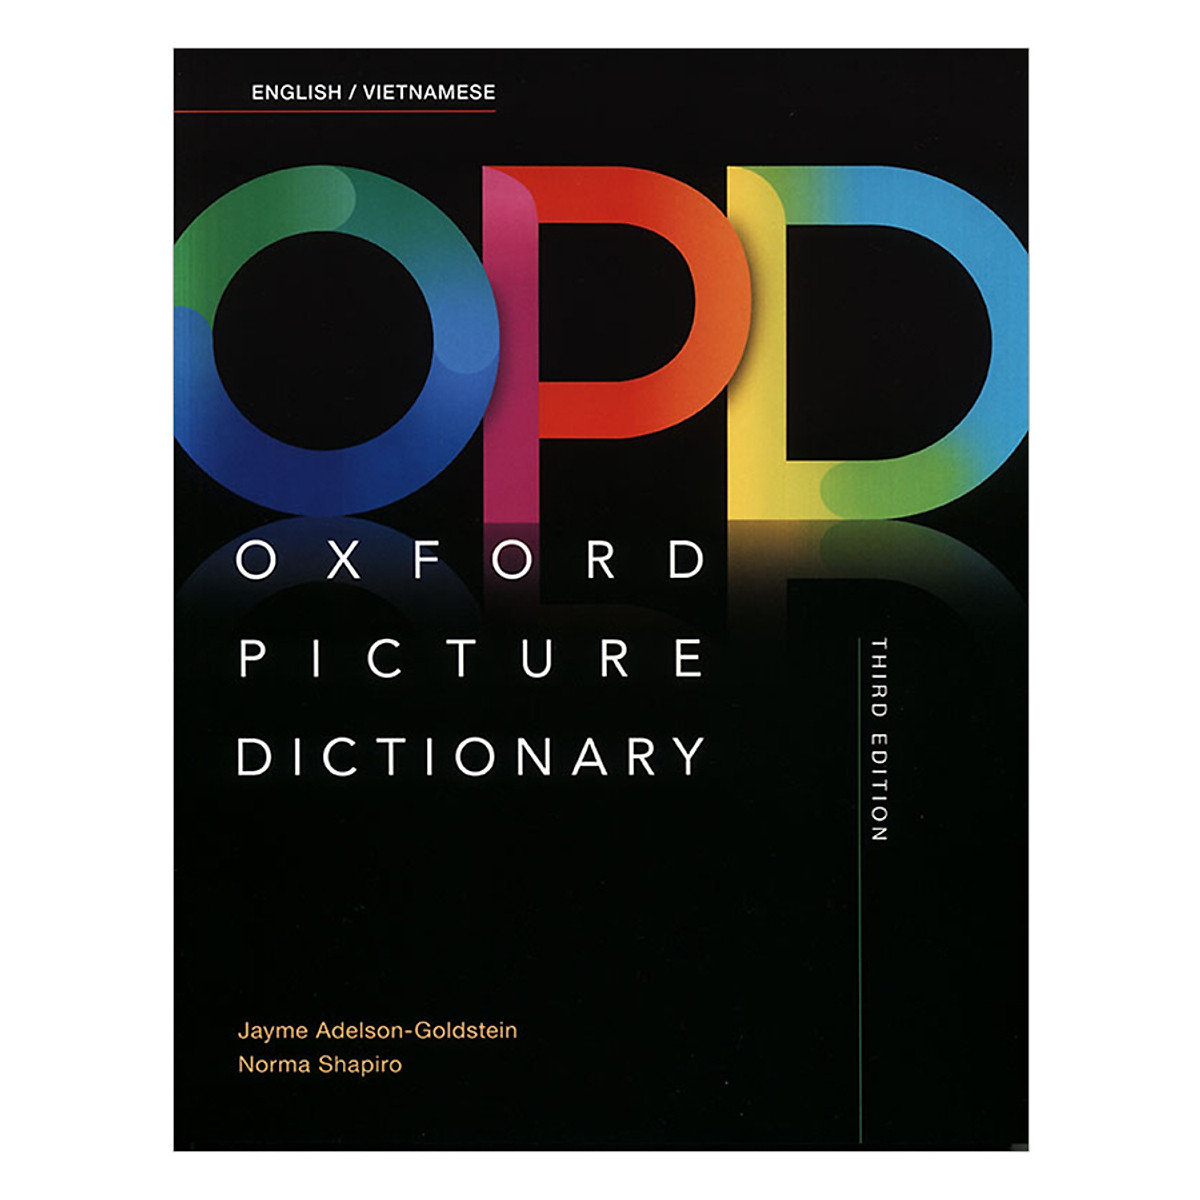 Oxford Picture Dictionary English/Vietnamese 3 Ed. Dictionary